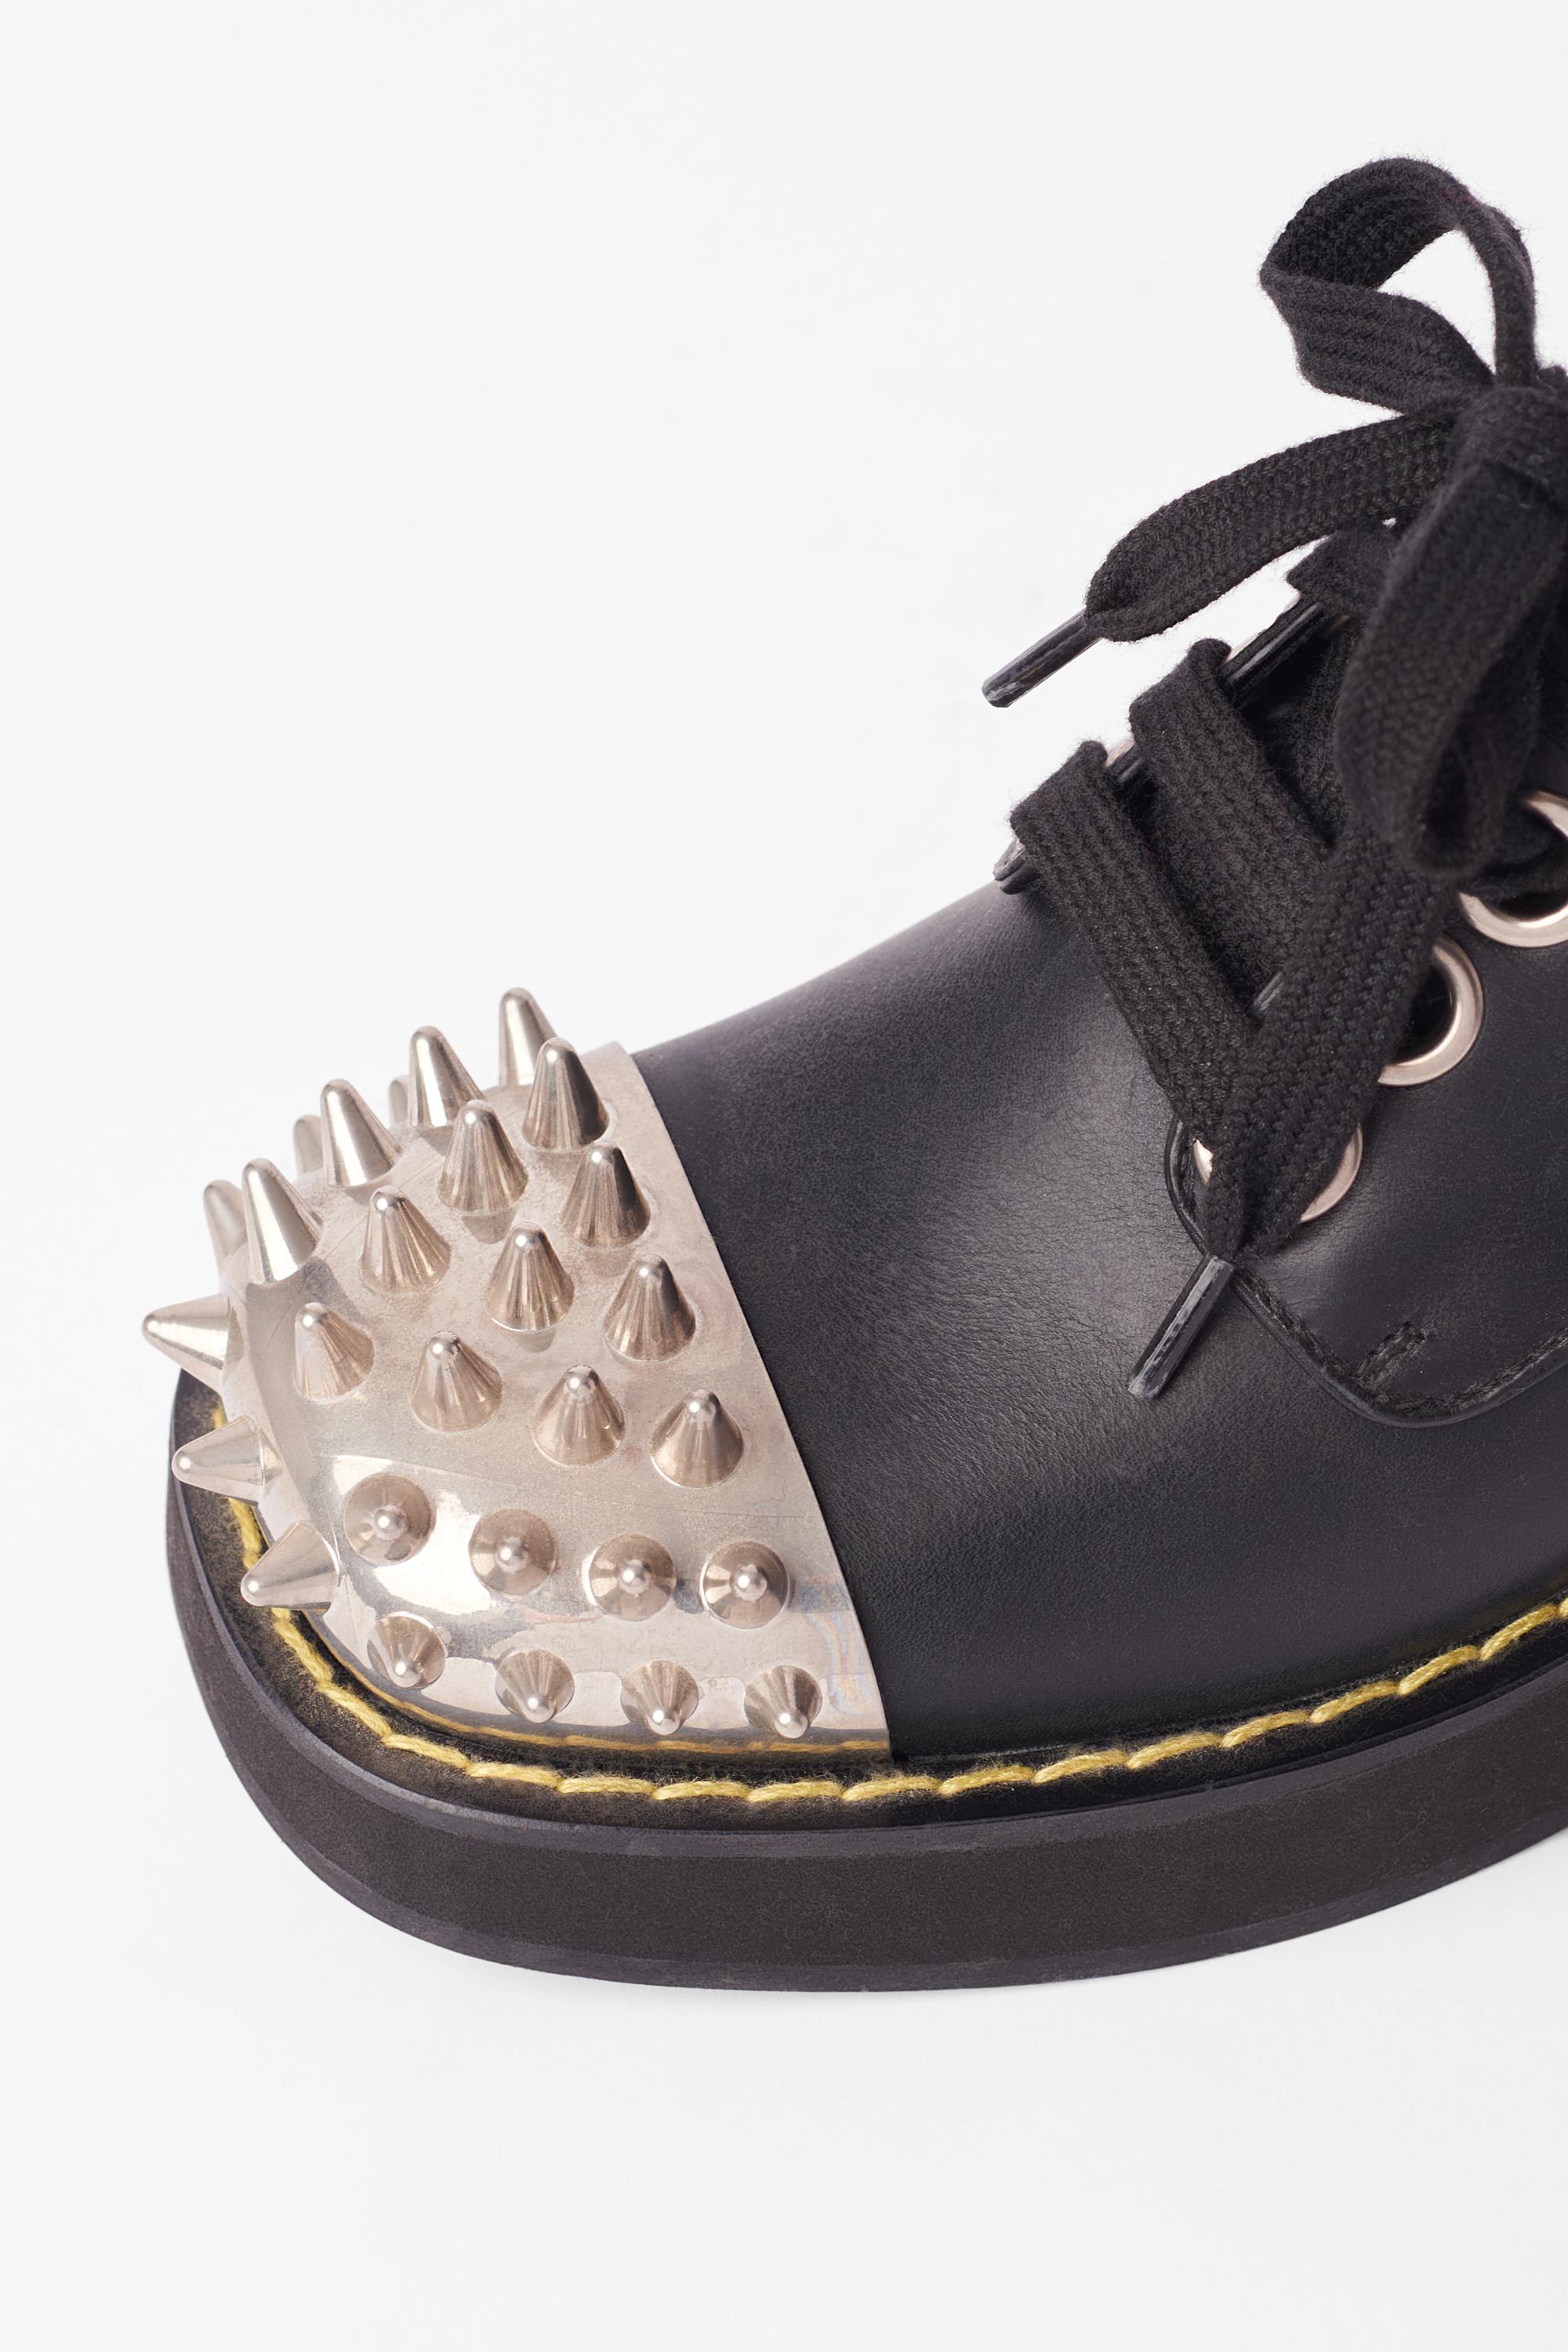 Women's Spiked Leather Block Heel Derby Shoes For Sale